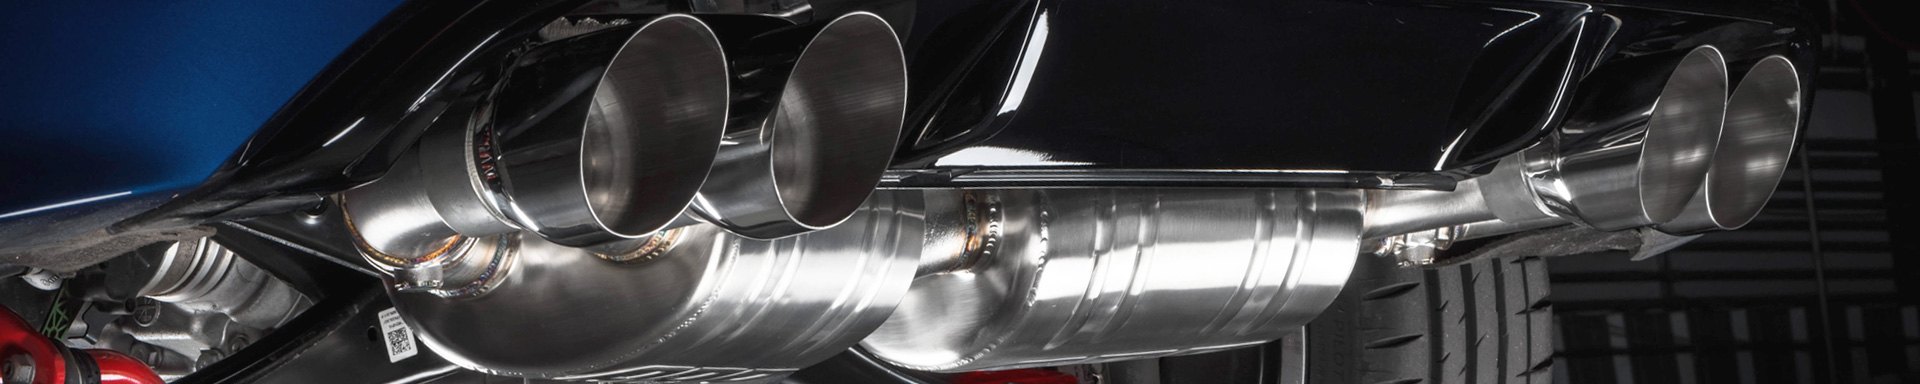 Performance Resonator-Back Exhaust Systems